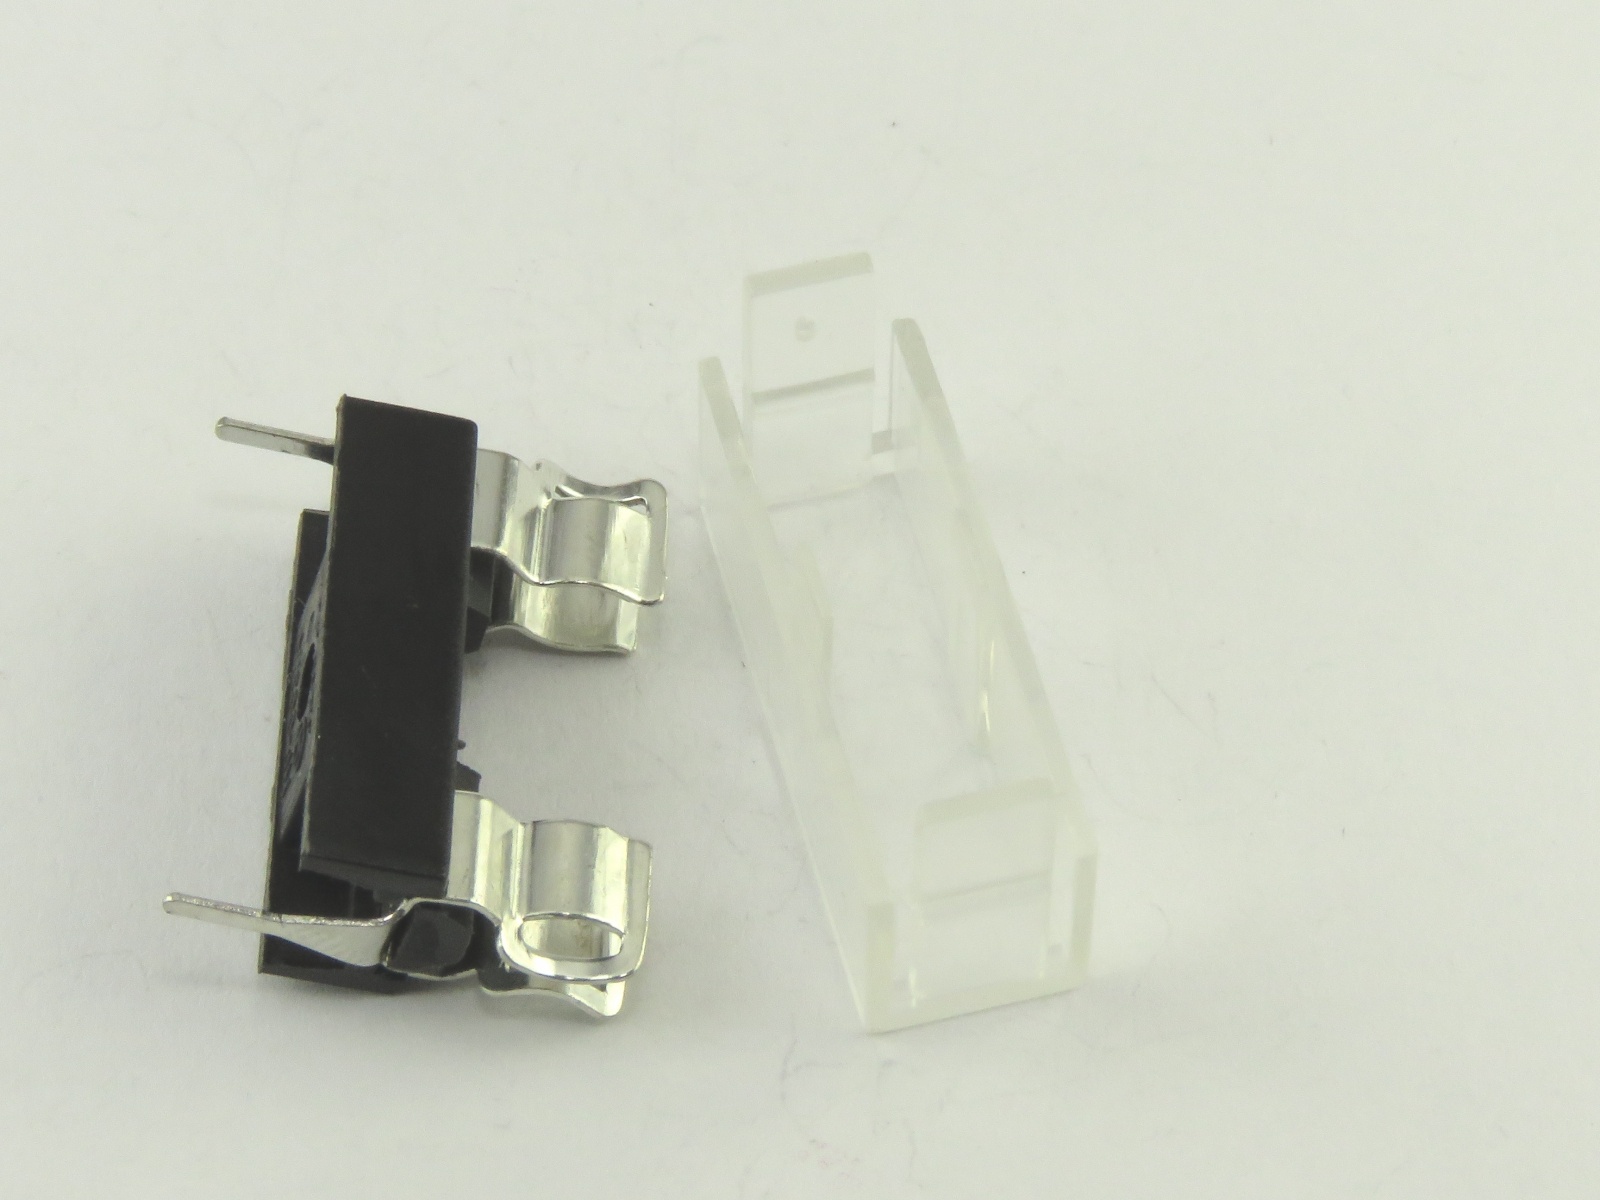 Support porte-fusible 5x20mm ZH1-ASSY (image 3/3)